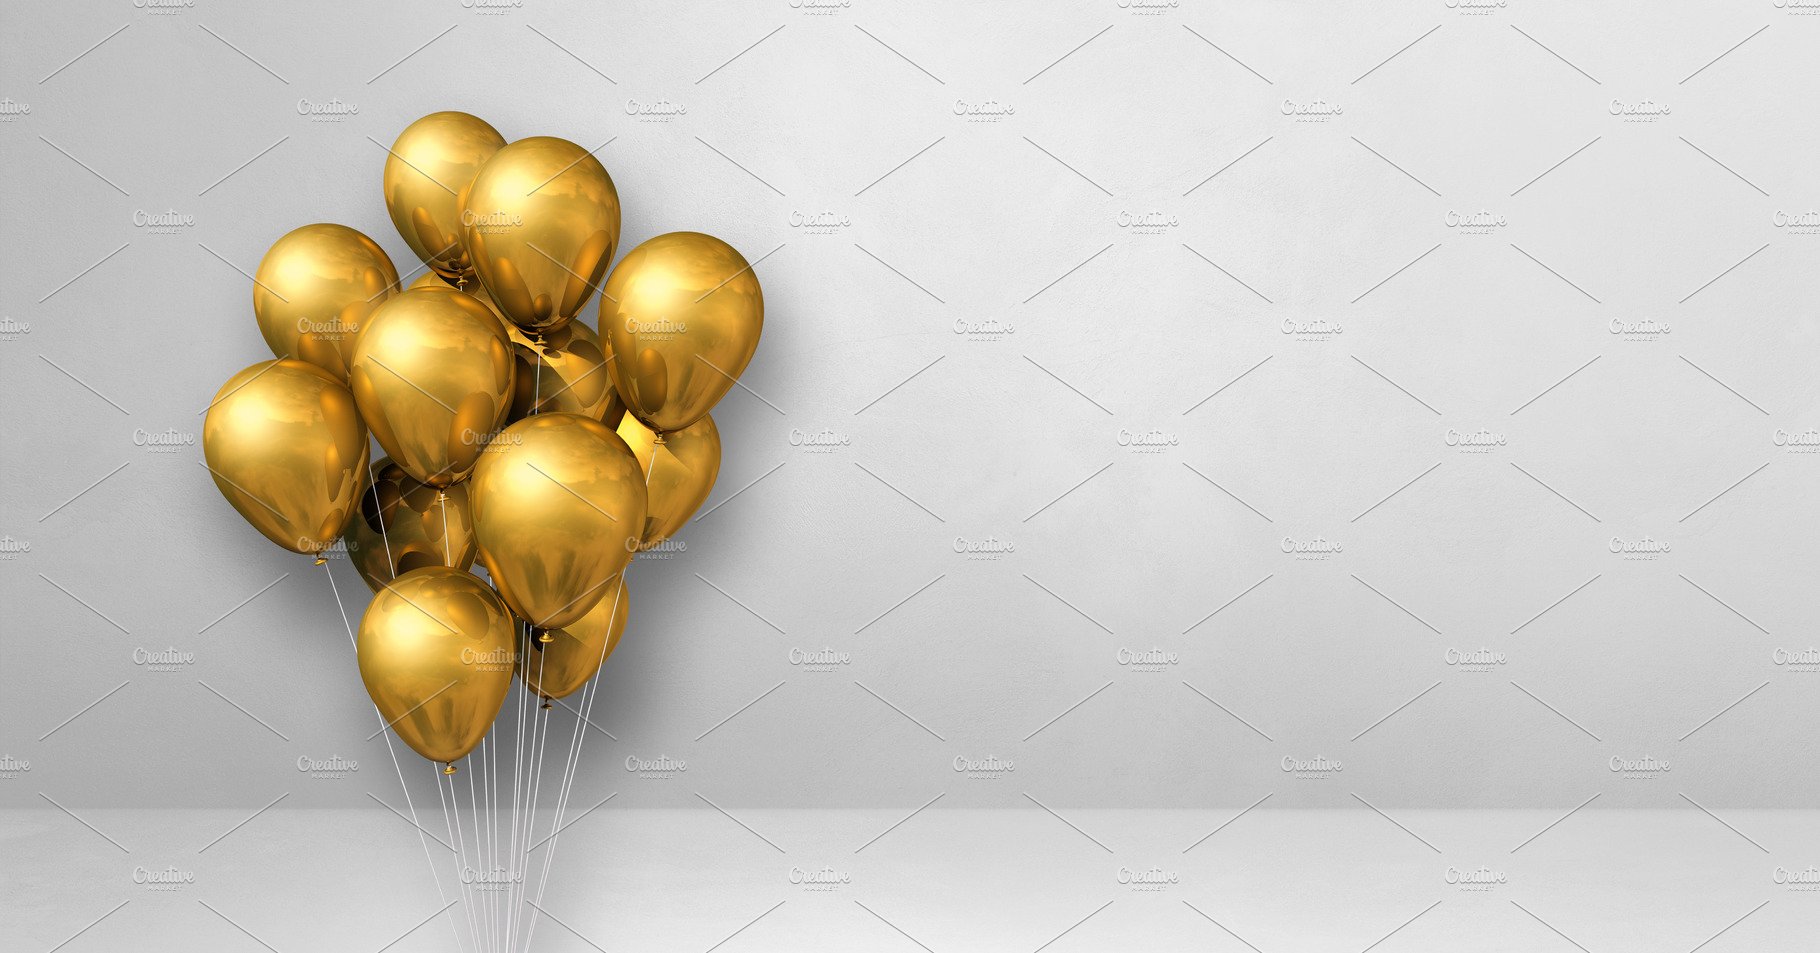 Gold balloons bunch on a white wall background. Horizontal banne cover image.